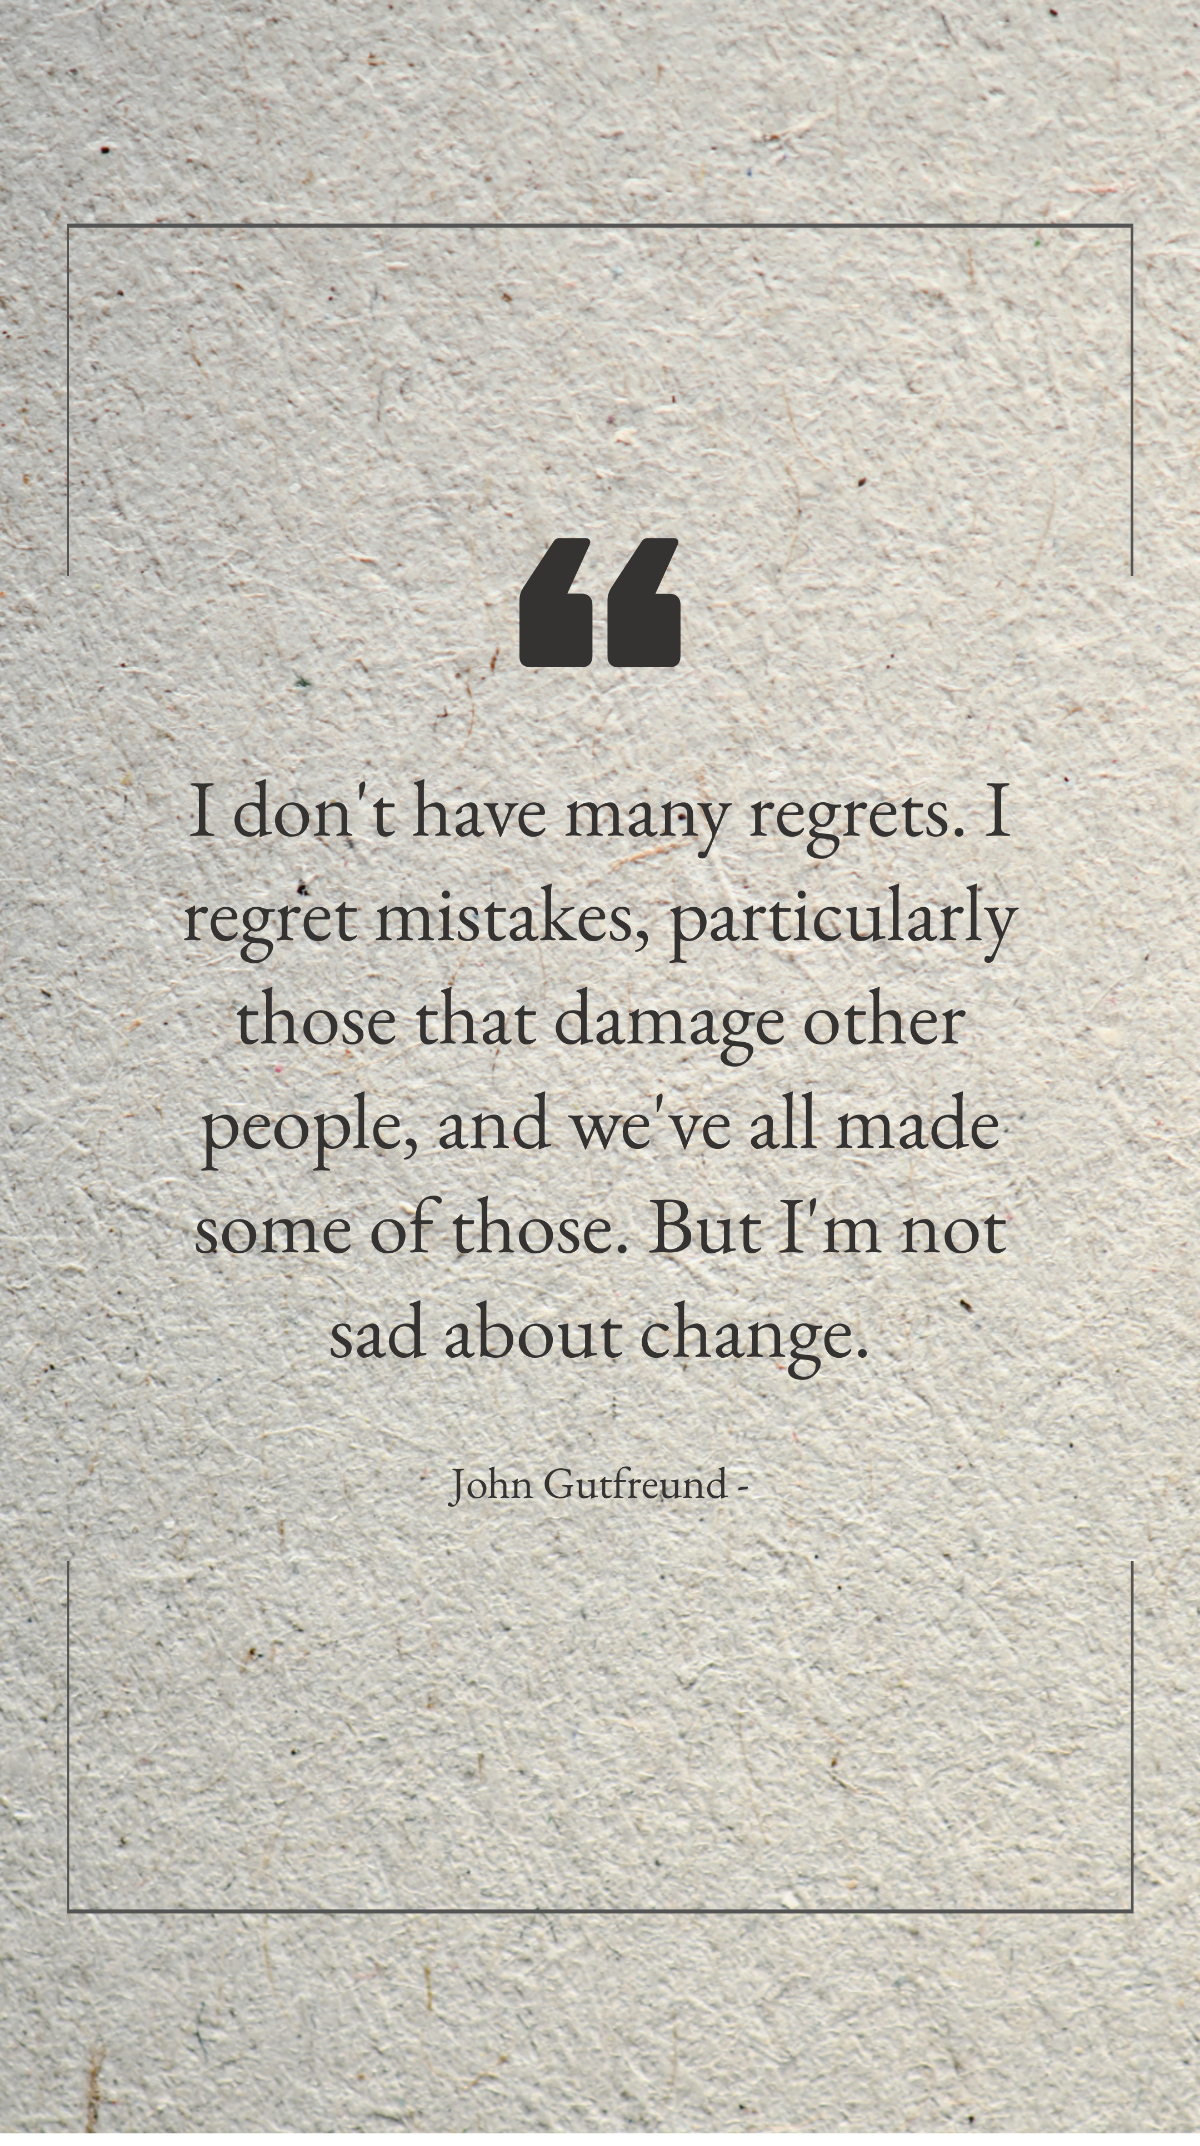 John Gutfreund - I don't have many regrets. I regret mistakes, particularly those that damage other people, and we've all made some of those. But I'm not sad about change. Template